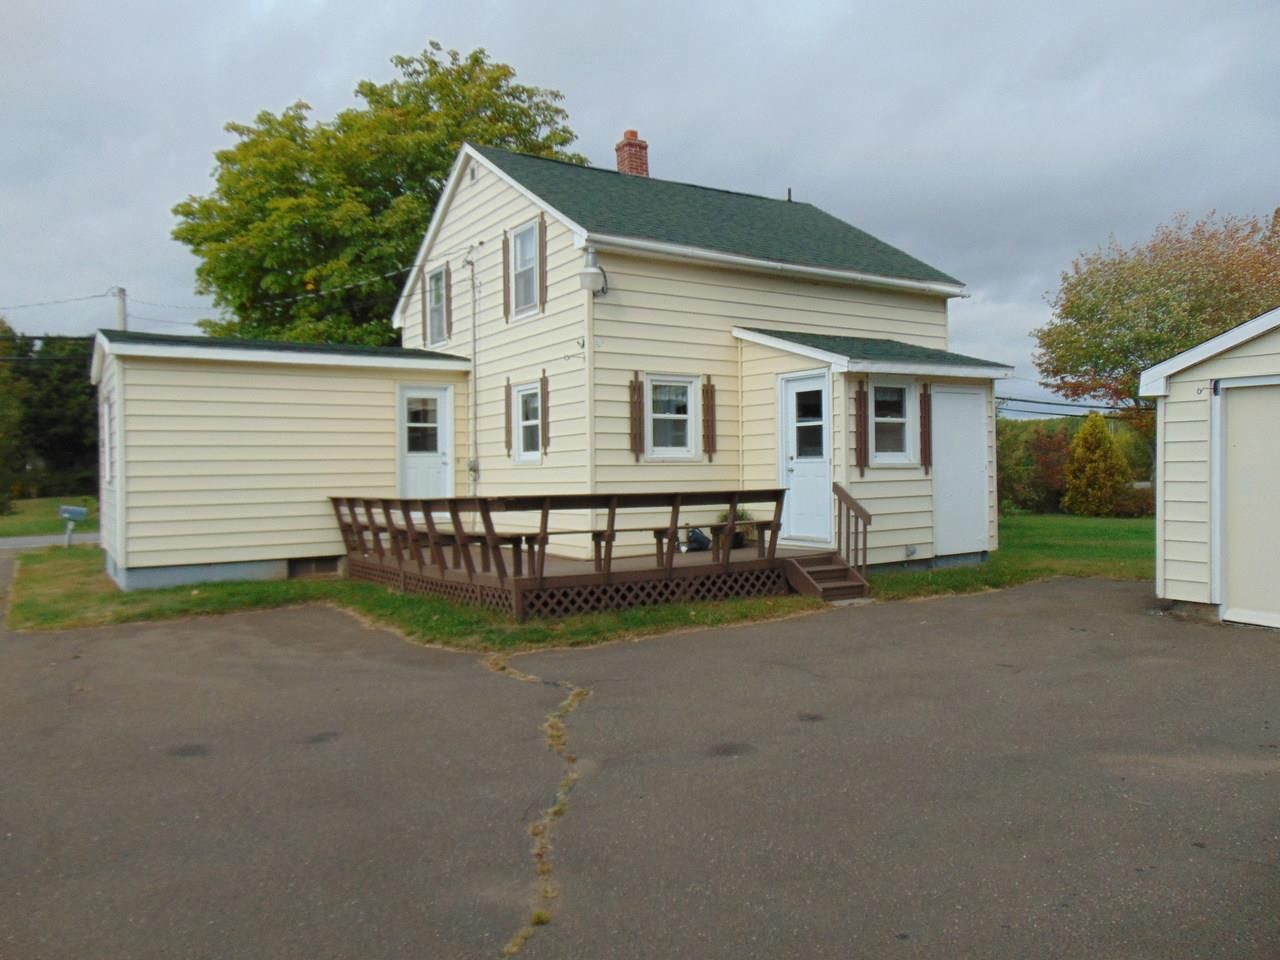 Main Photo: 1598 Highway 359 in Steam Mill: 404-Kings County Residential for sale (Annapolis Valley)  : MLS®# 202020098